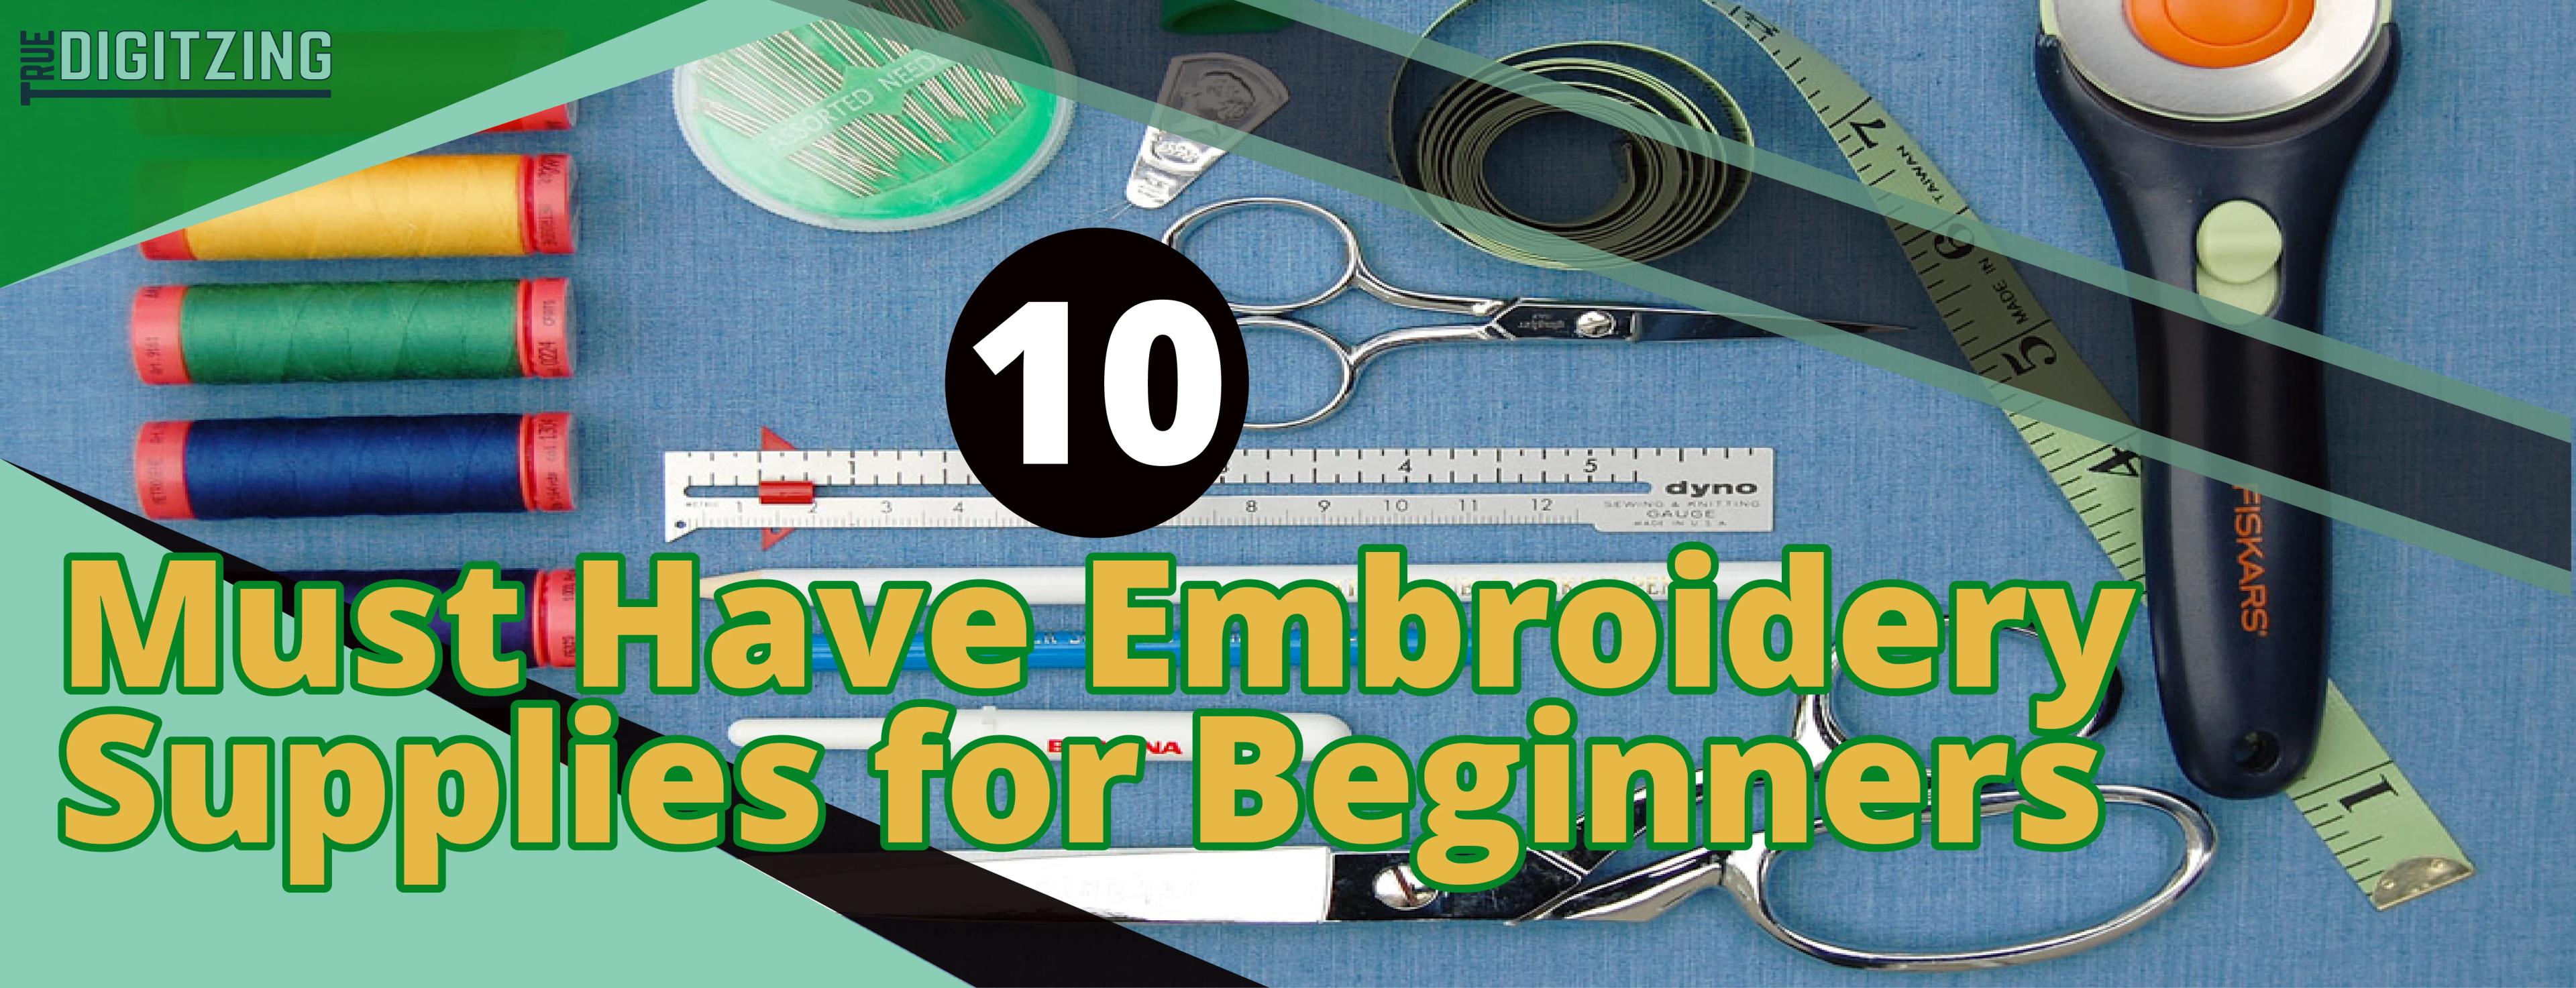 Embroidery Supplies for Beginner